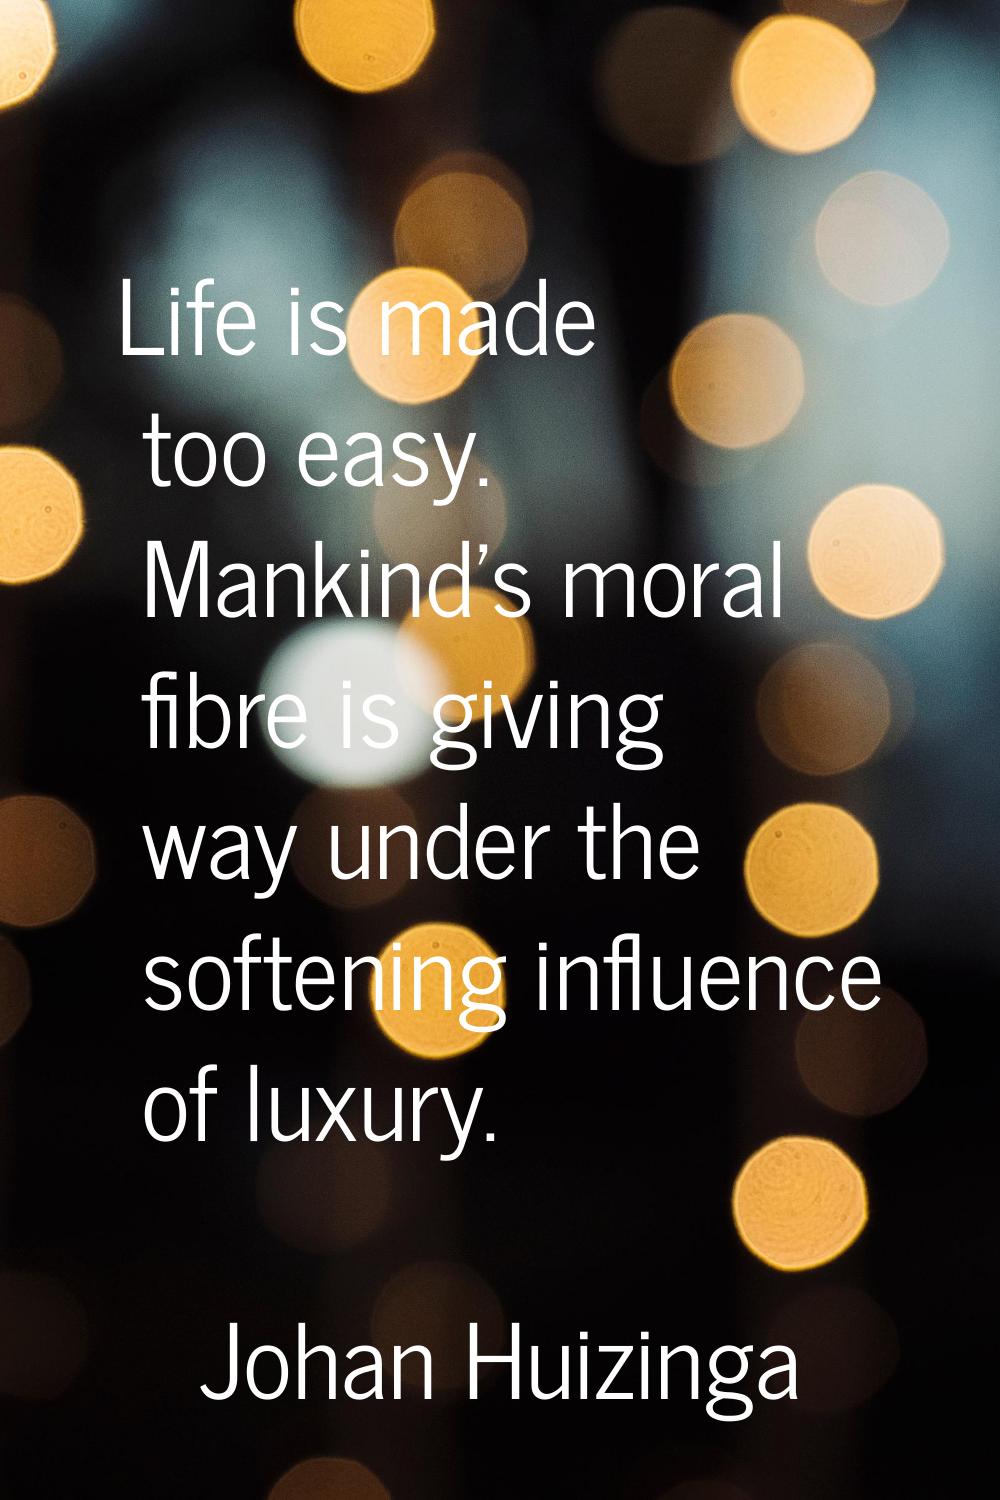 Life is made too easy. Mankind's moral fibre is giving way under the softening influence of luxury.